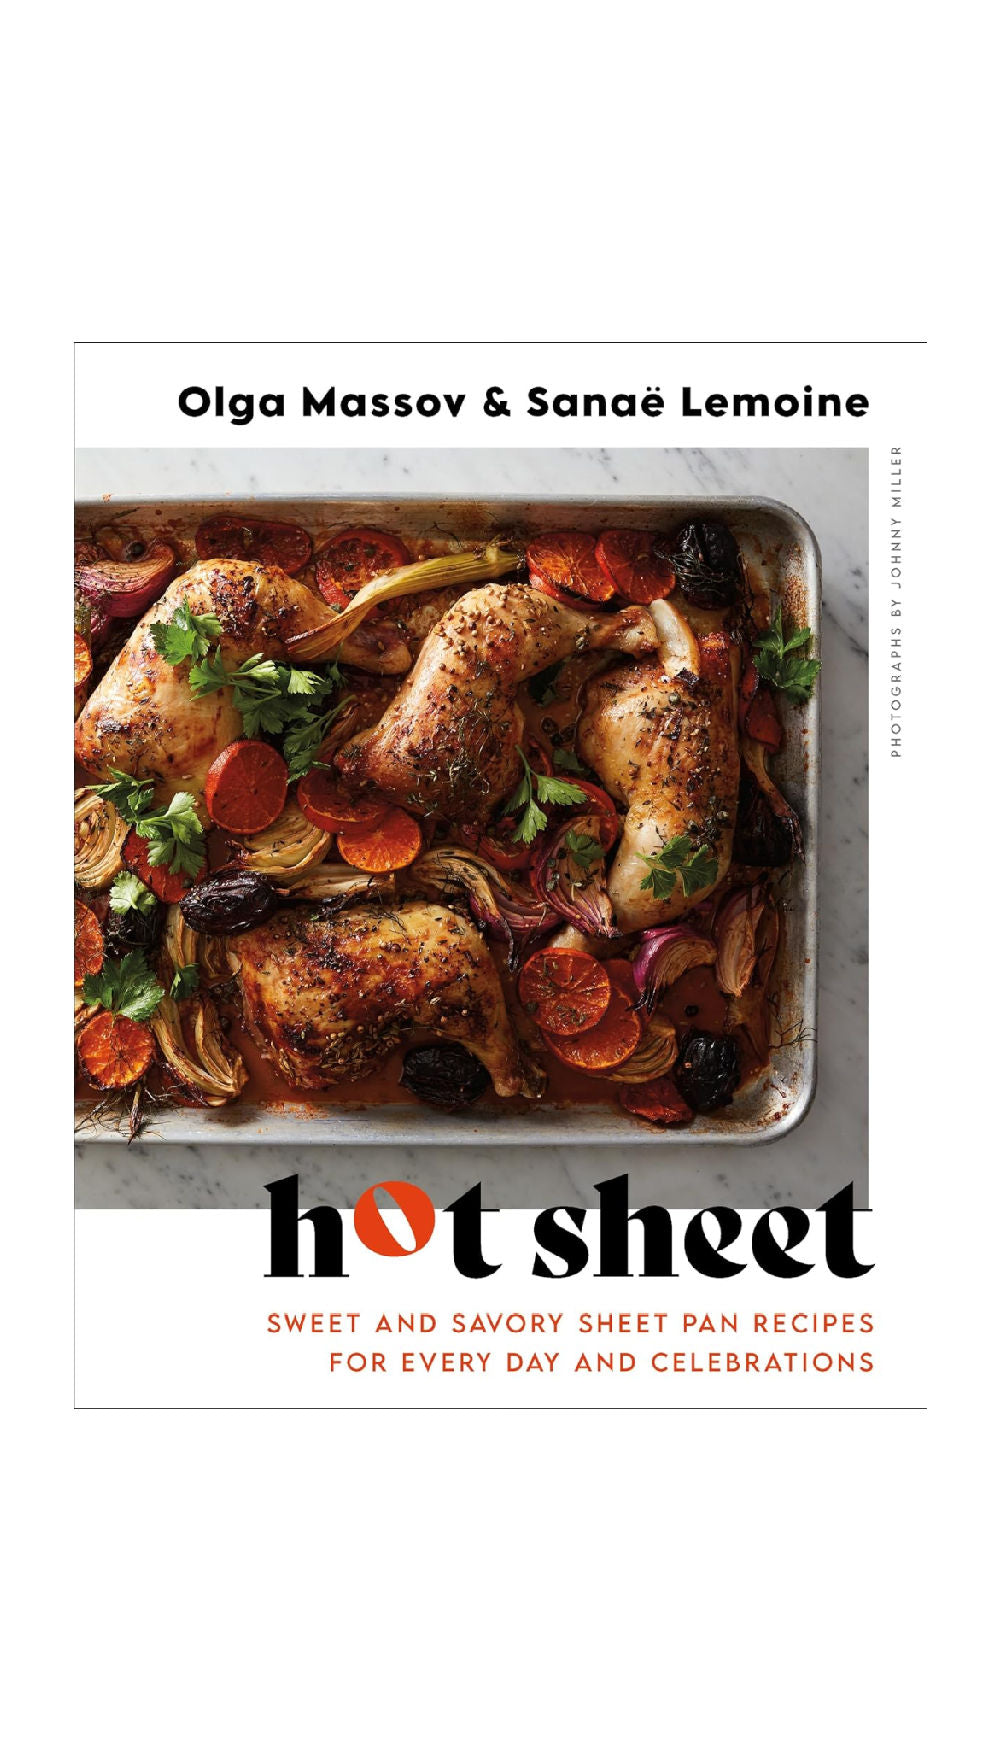 Hot Sheet: Sweet and Savory Sheet Pan Recipes for Every Day and Celebrations